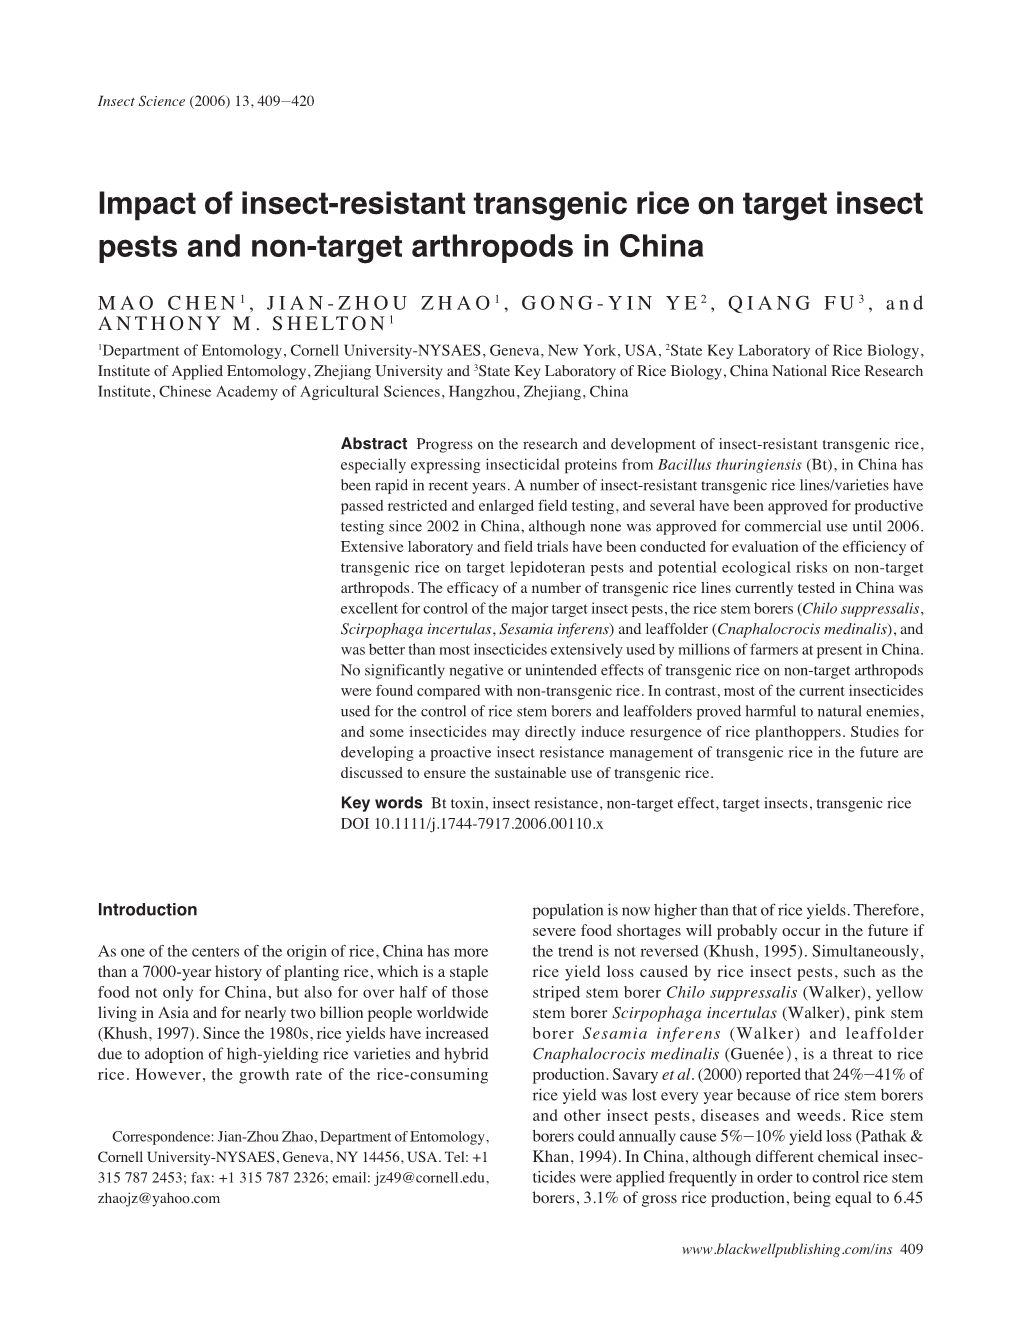 Impact of Insect-Resistant Transgenic Rice on Target Insect Pests and Non-Target Arthropods in China